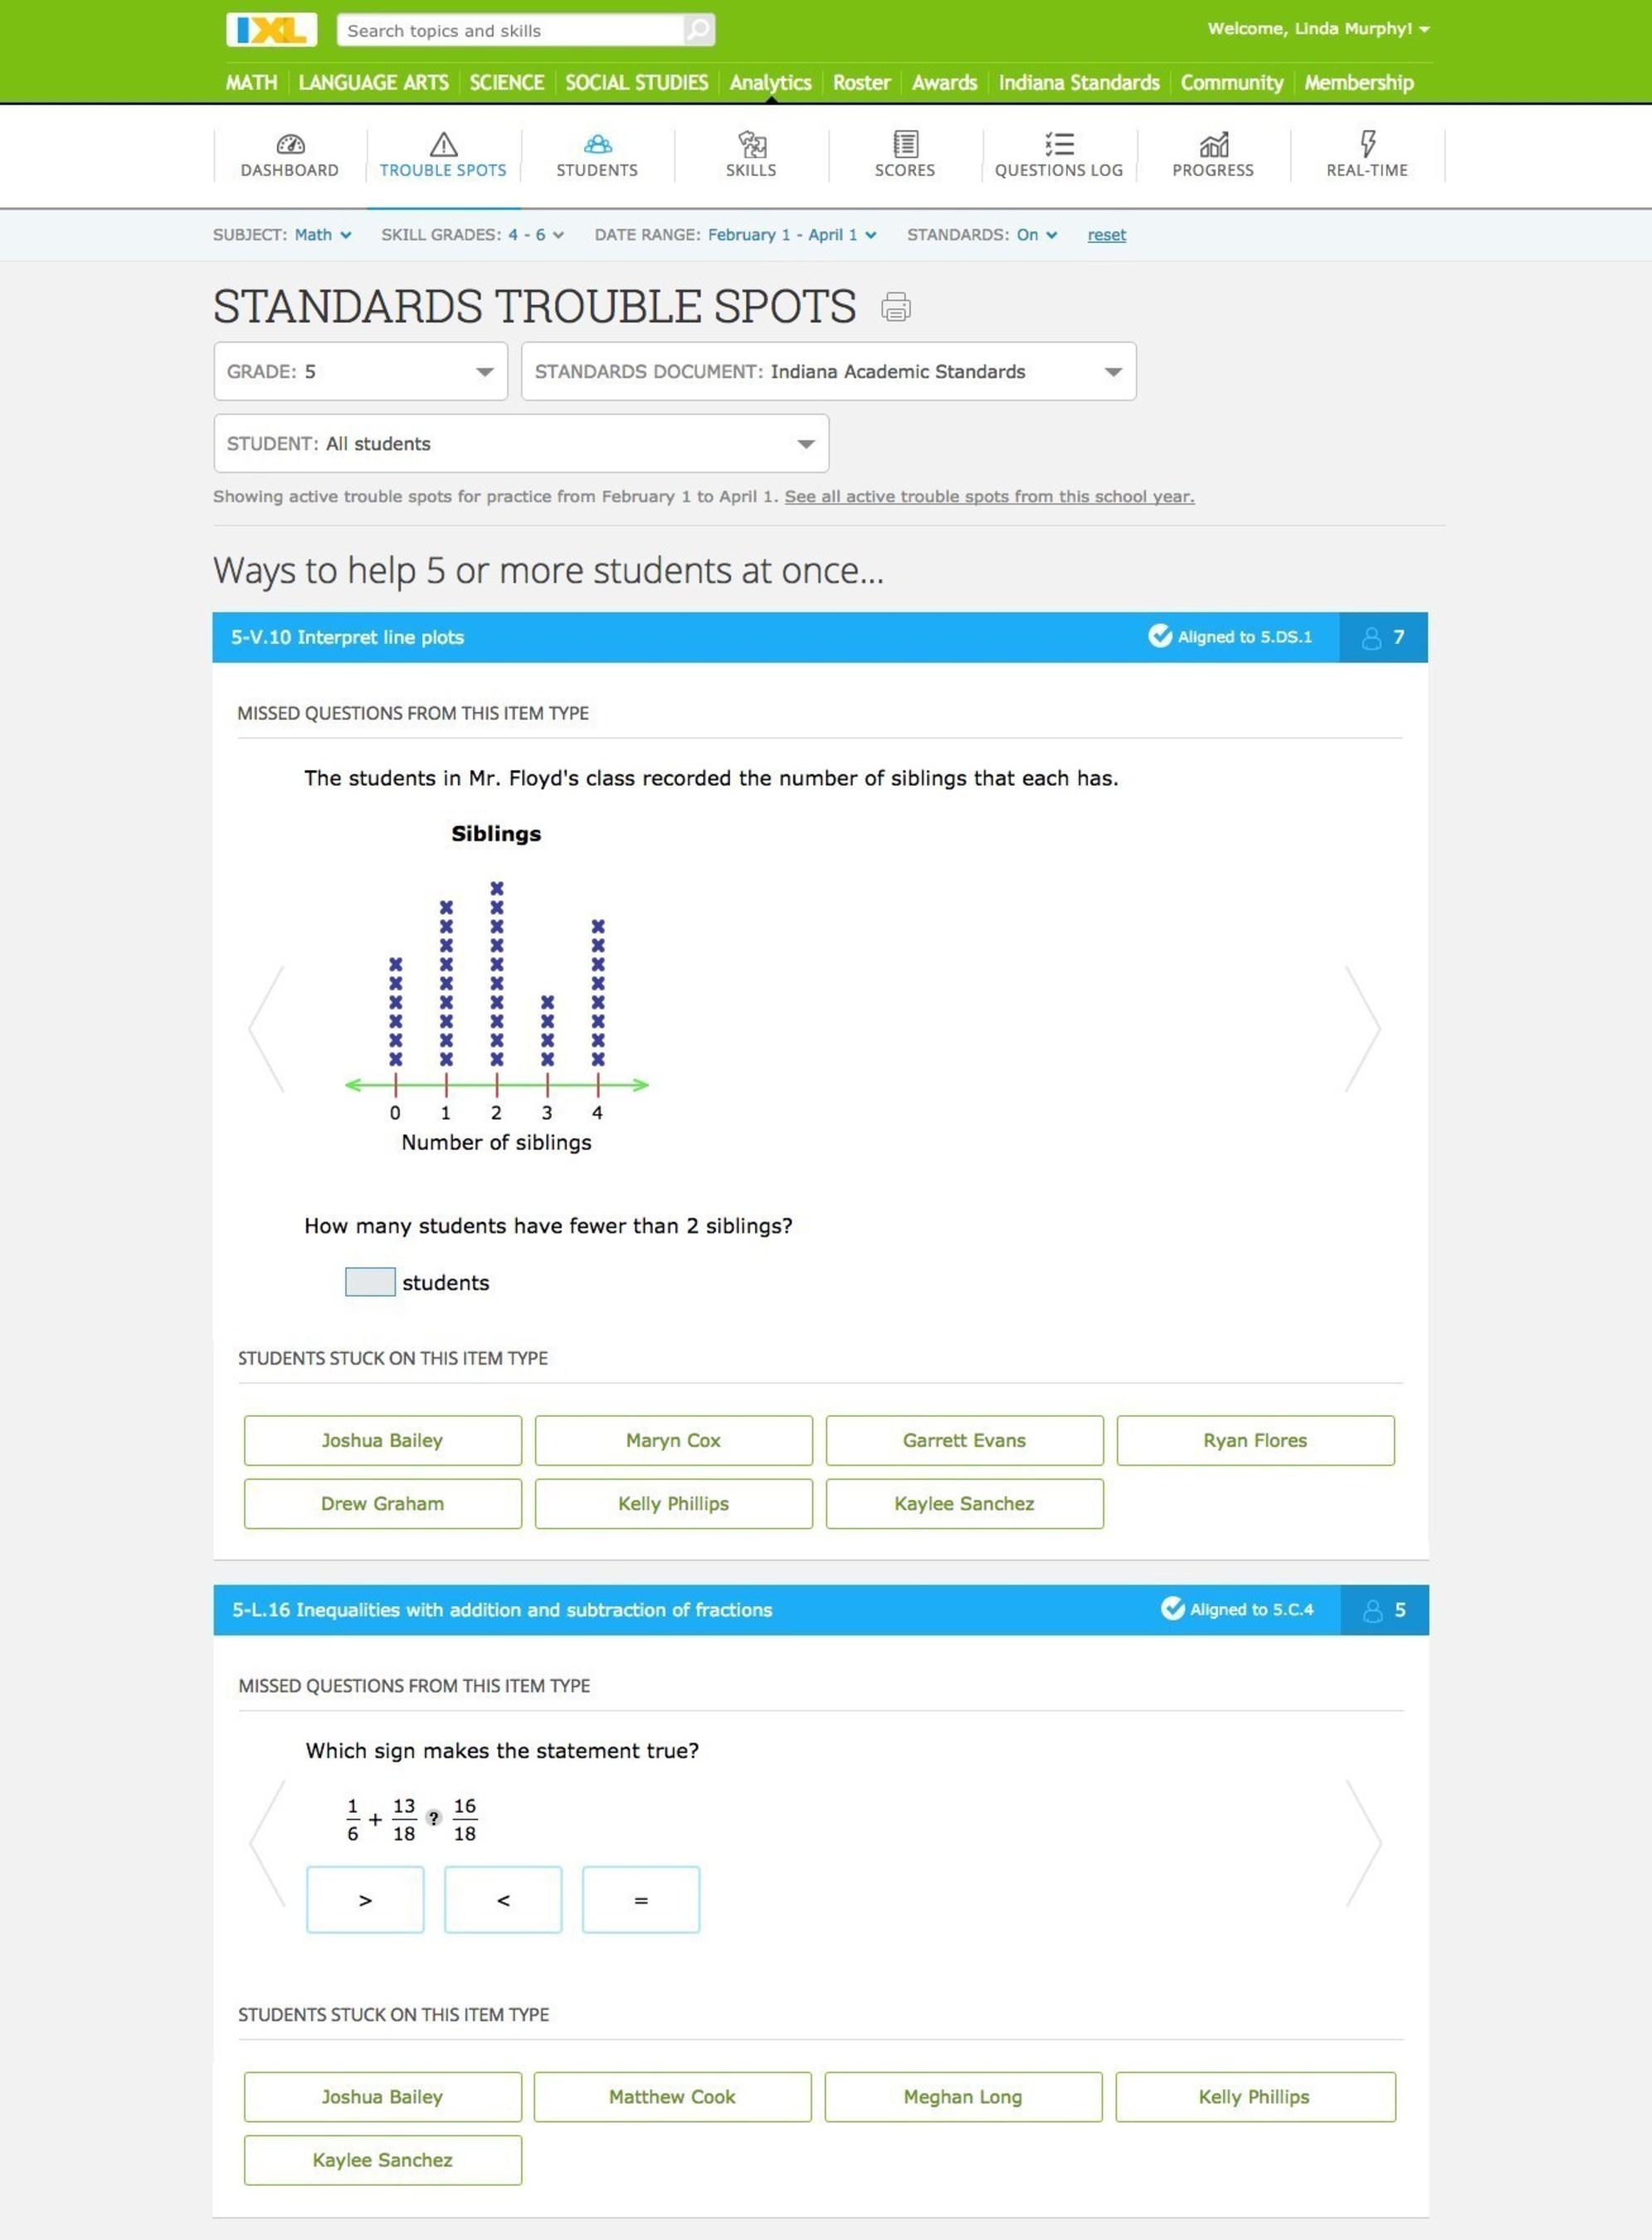 With IXL Analytics, teachers can easily determine trouble spots for students, aiding in small-group instruction.